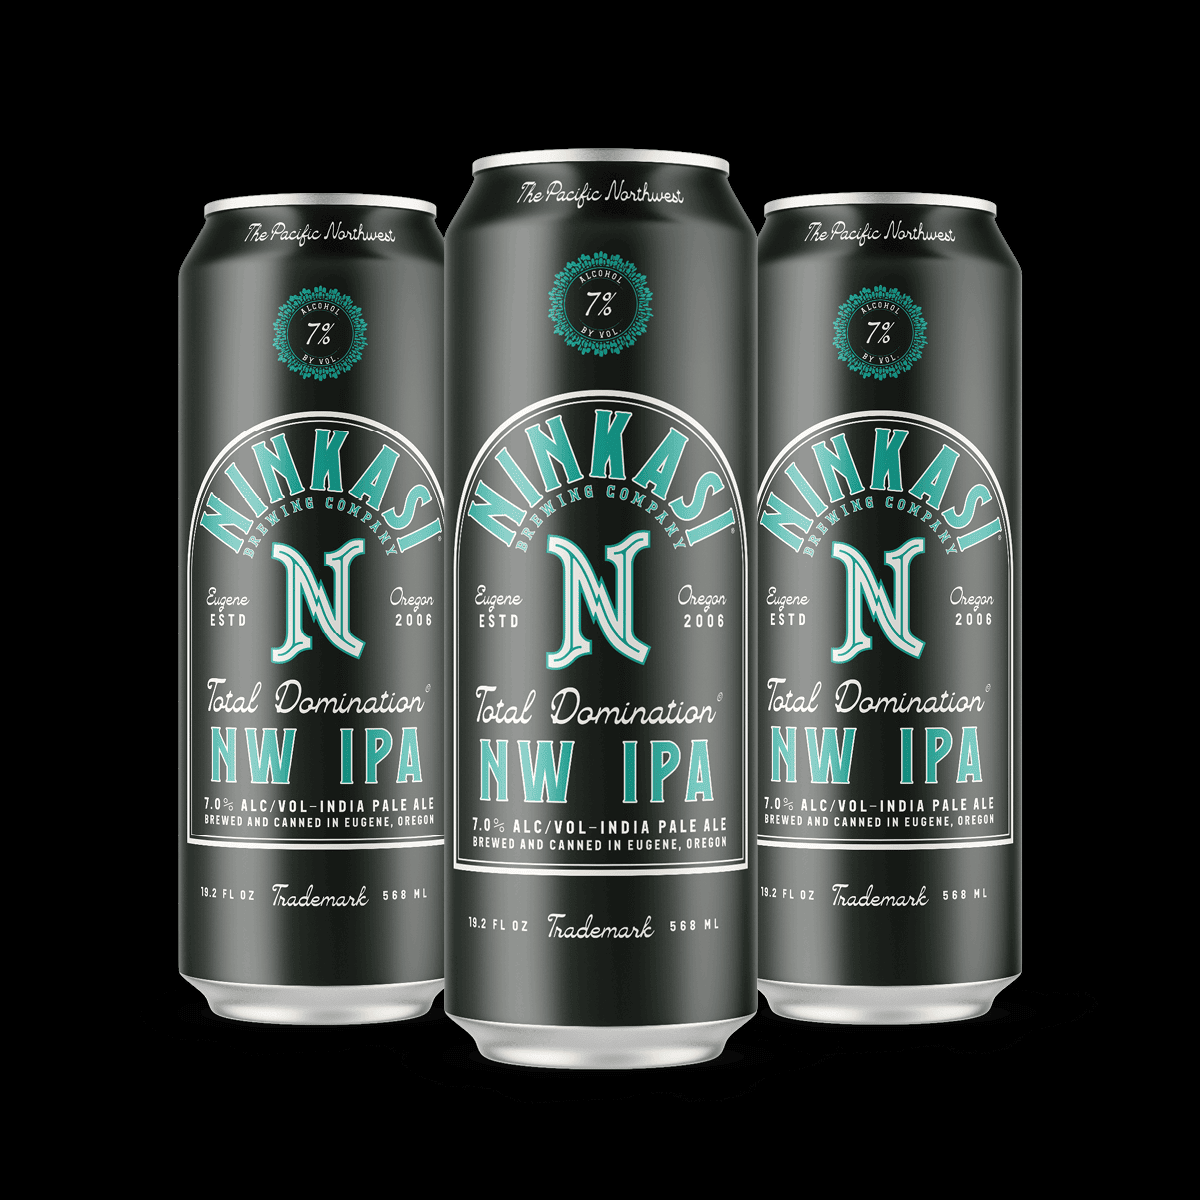 Three tall cans of Ninkasi's "Total Domination NW IPA" presented against a dark background. The cans have a sleek silver design with teal accents, celebrating the beer's Pacific Northwest roots. Each can displays a "7% ALC/VOL" label in a teal emblem, denoting its alcohol content. The beer is described as a "NW IPA", brewed and canned in Eugene, Oregon since 2006. The Ninkasi logo is prominent on each can, which also mentions that each can holds 19.2 fl oz.